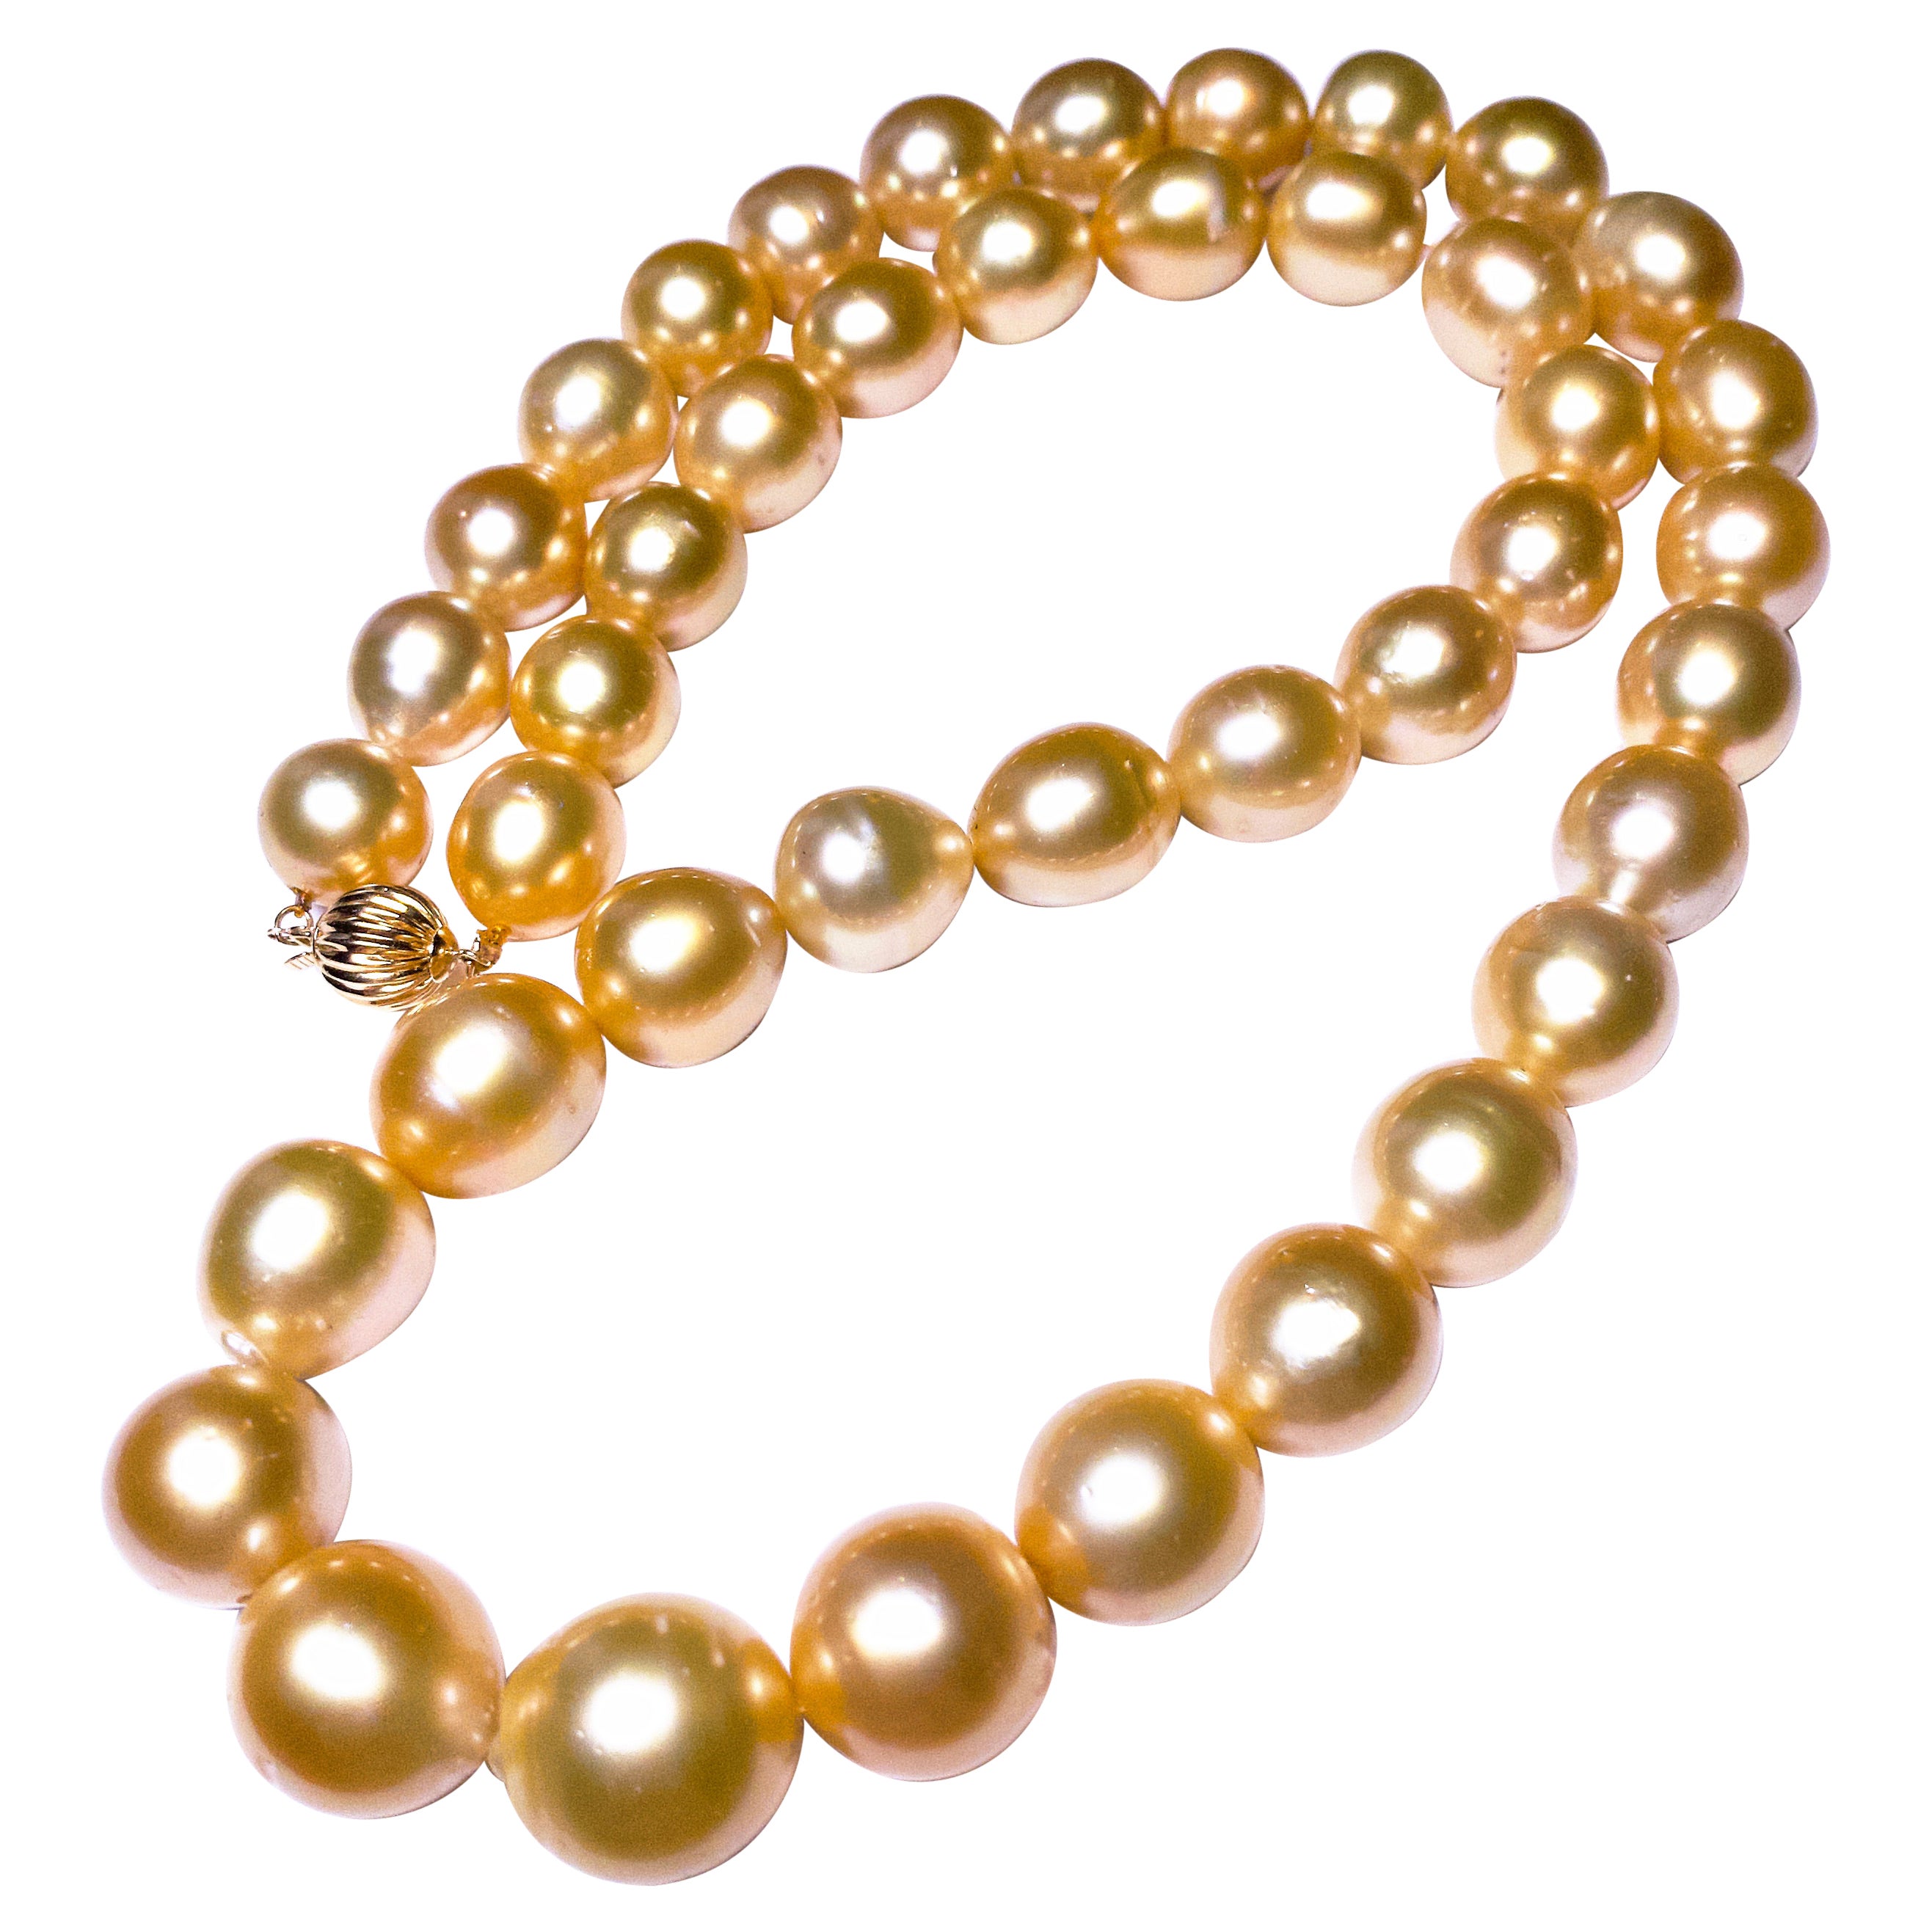 Golden Colour South Sea Pearl Necklace with 18k Gold Clasp For Sale